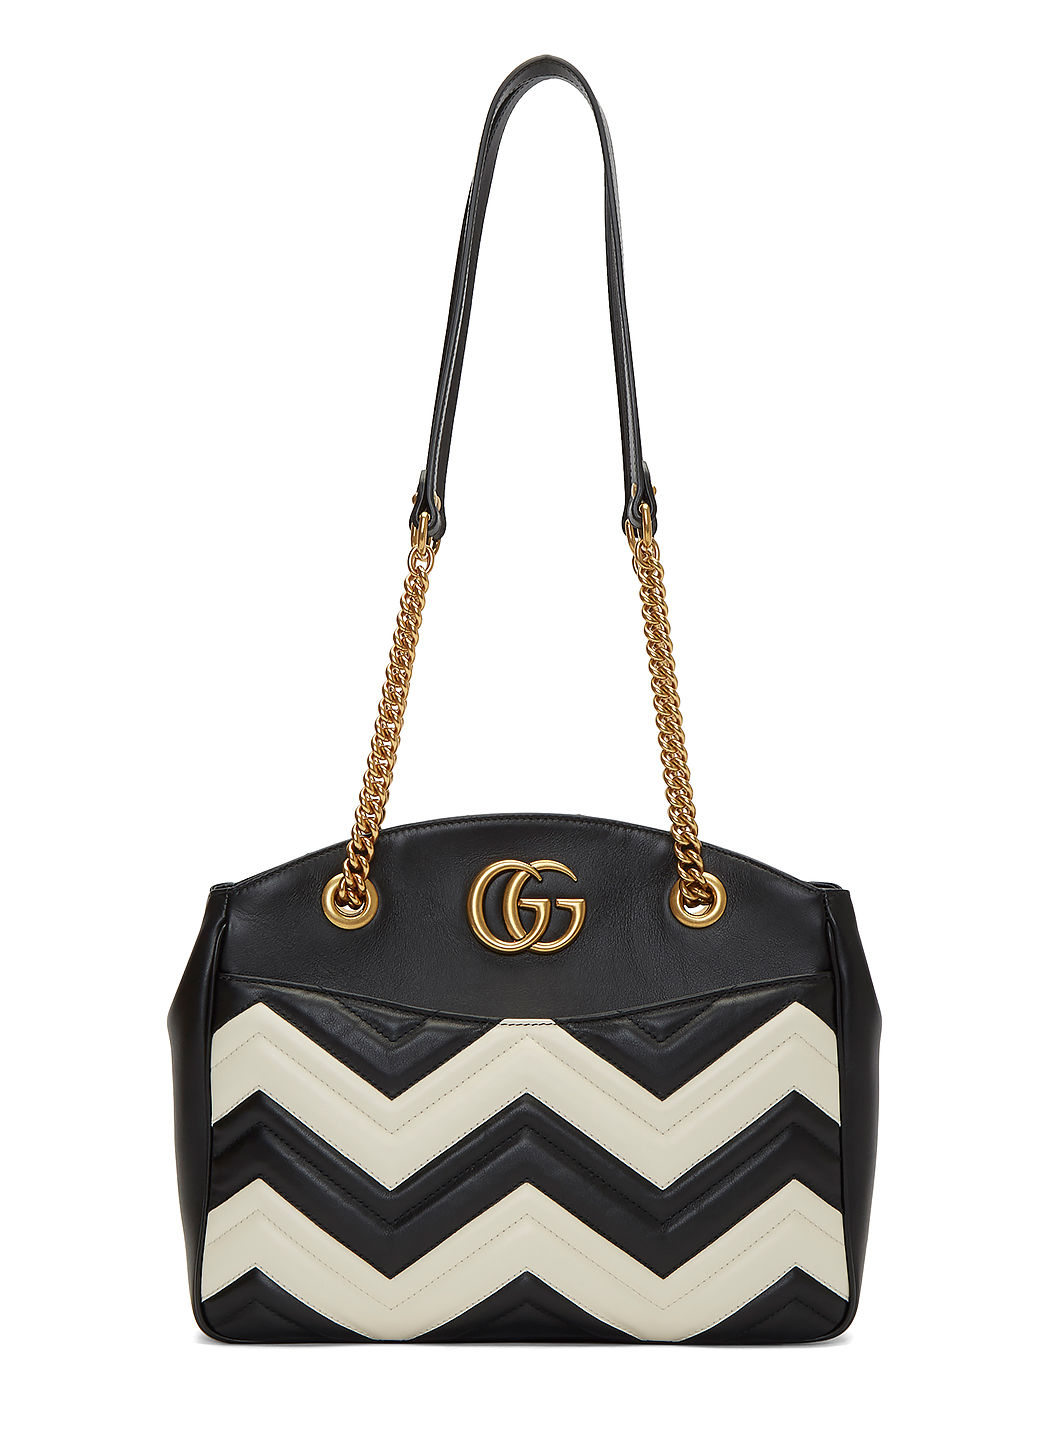 Gucci Women's Marmont Monochrome Zigzag Quilted Handbag In Black And ...